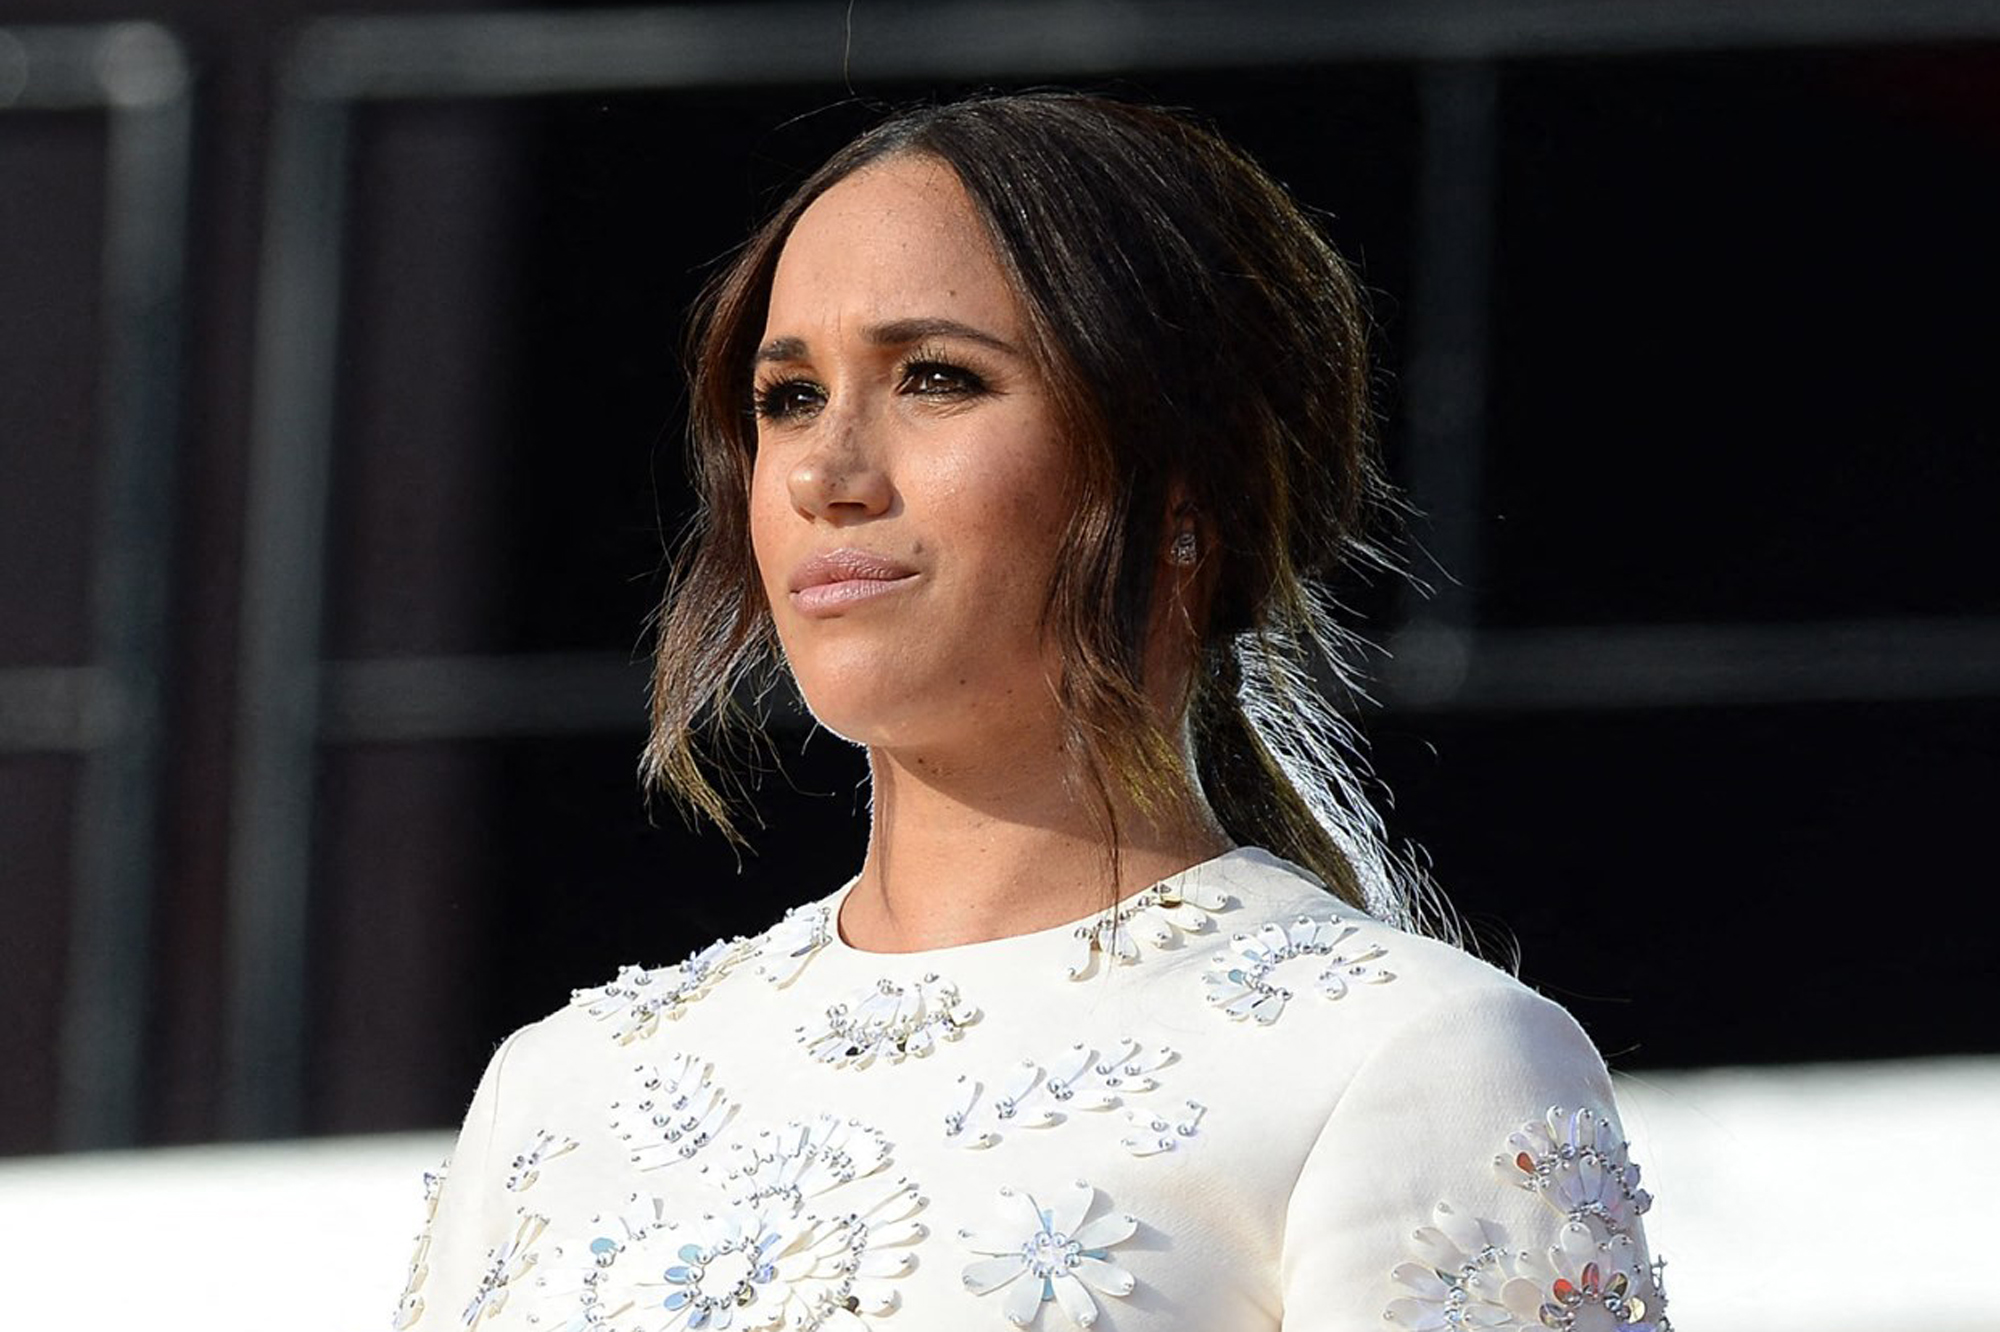 Meghan Markle wants to turn the English word “Archetypes” into a brand